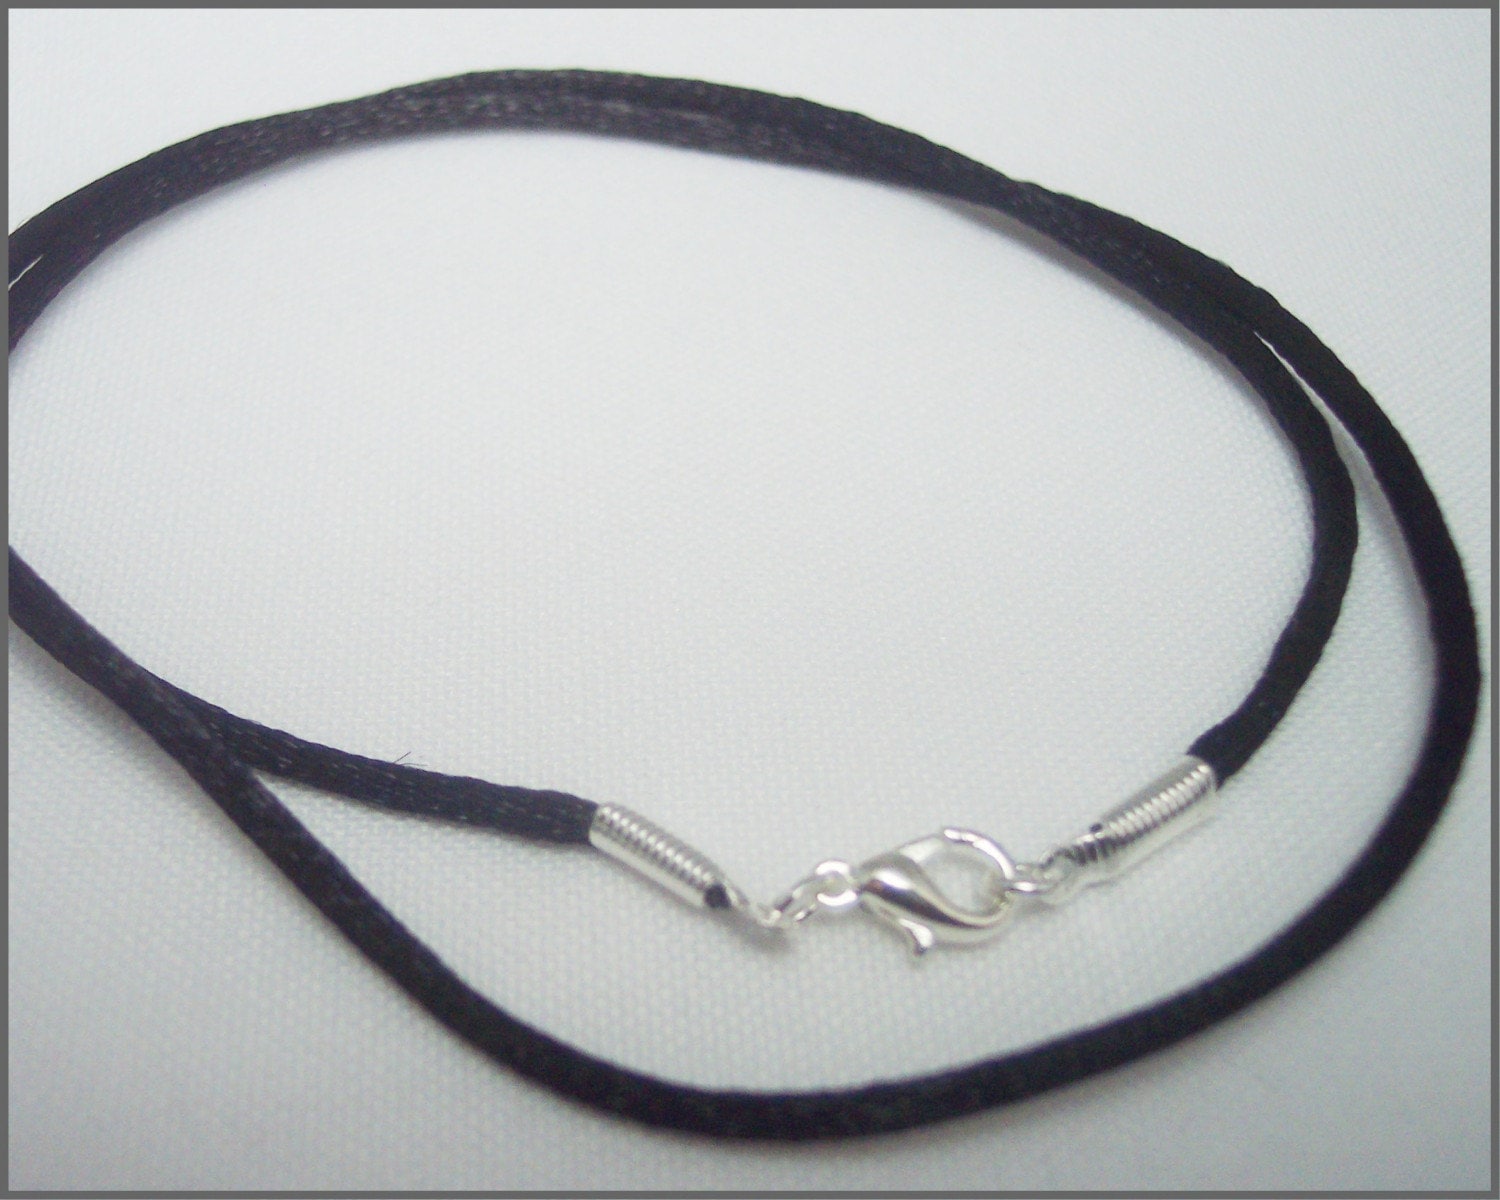 1mm extra thin satin necklace cords 13-36 inches